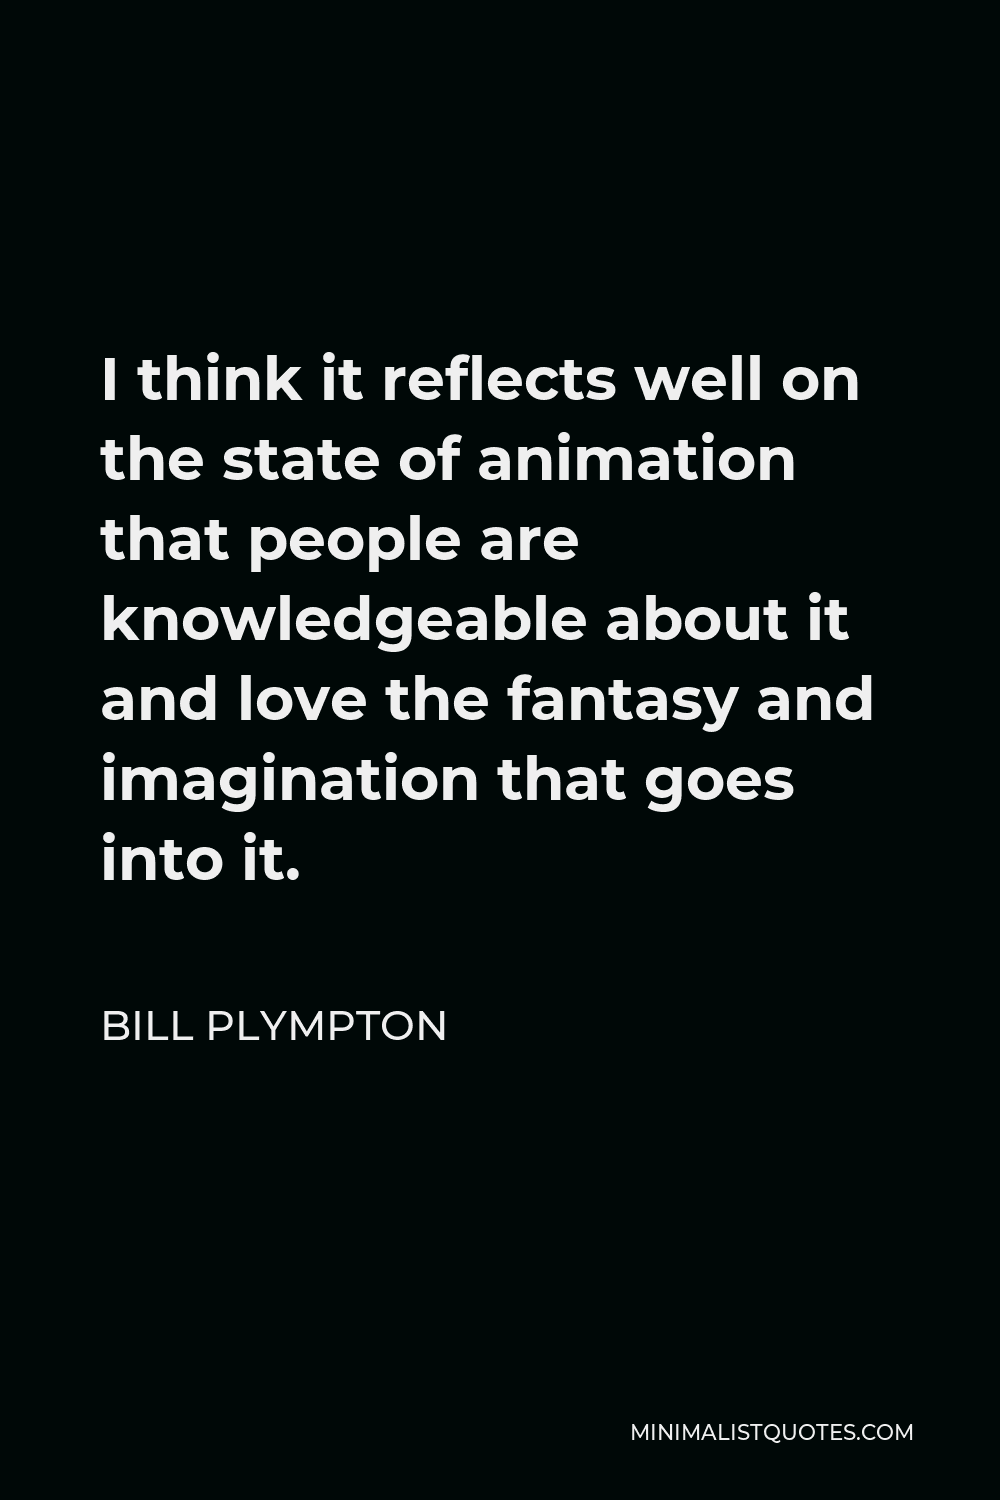 Bill Plympton Quote - I think it reflects well on the state of animation that people are knowledgeable about it and love the fantasy and imagination that goes into it.